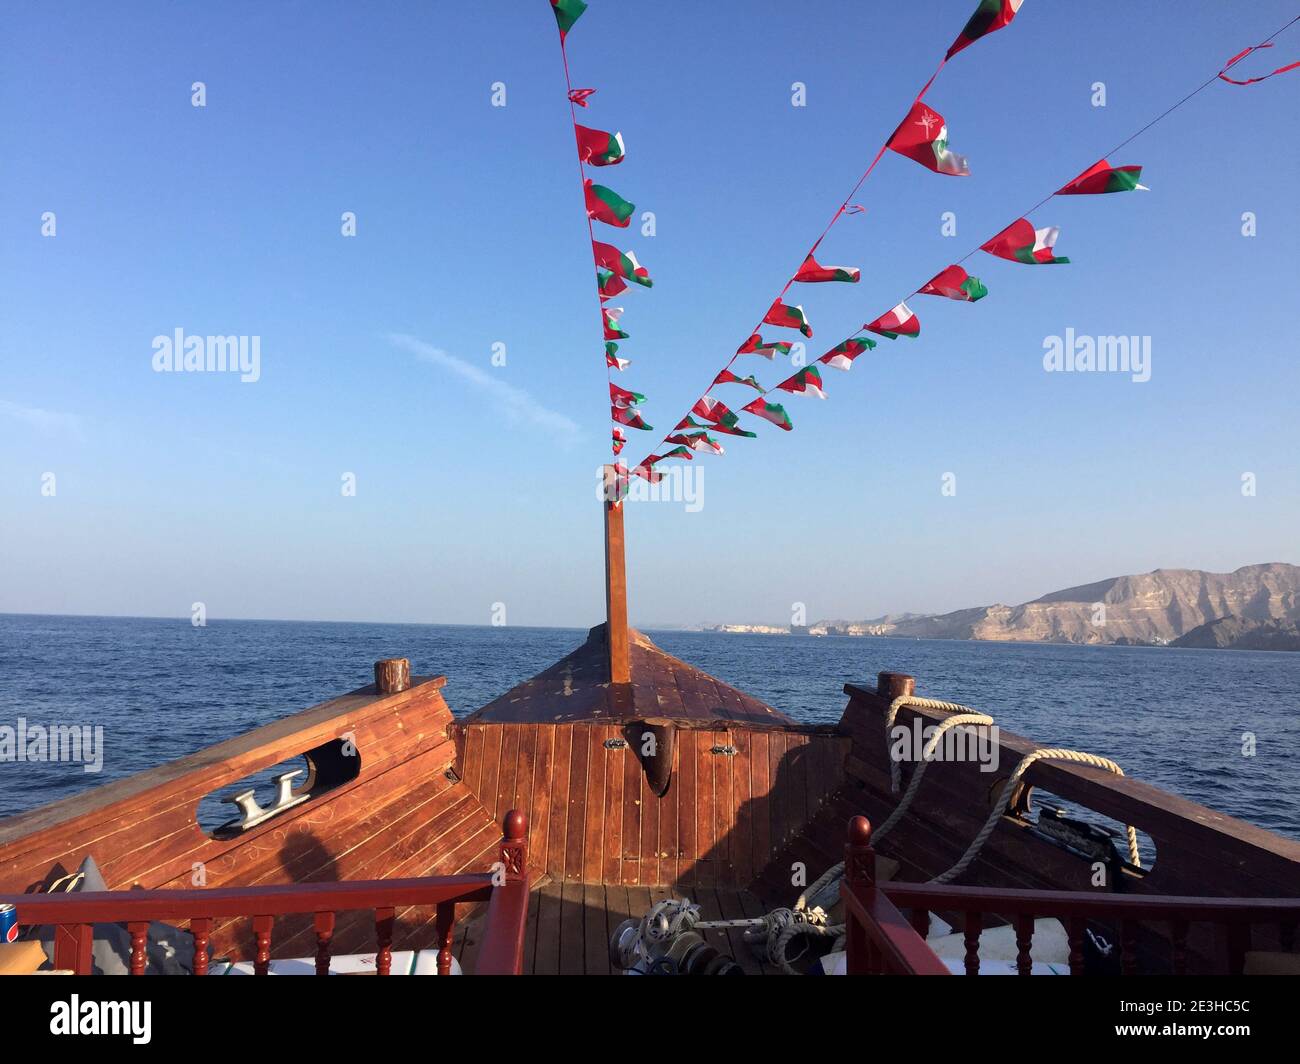 Sunset Cruise on a traditional Dhow, Muscat, Sultanate of Oman Stock Photo